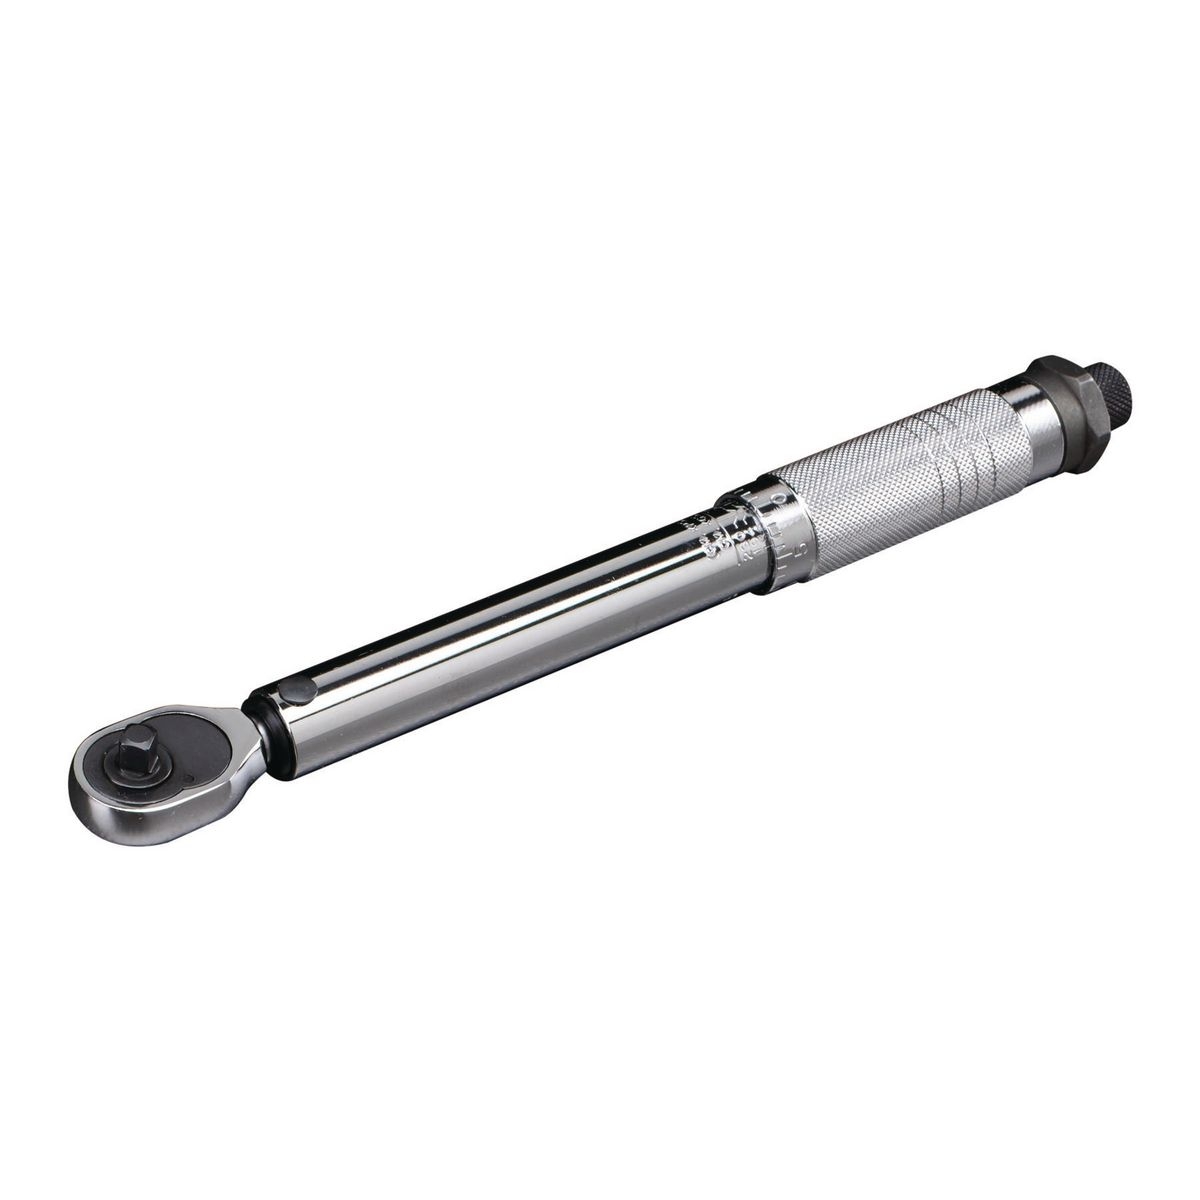 PITTSBURGH 1/4 in. Drive Click Type Torque Wrench - Item 63881 / 02696 / 61277 / 94735